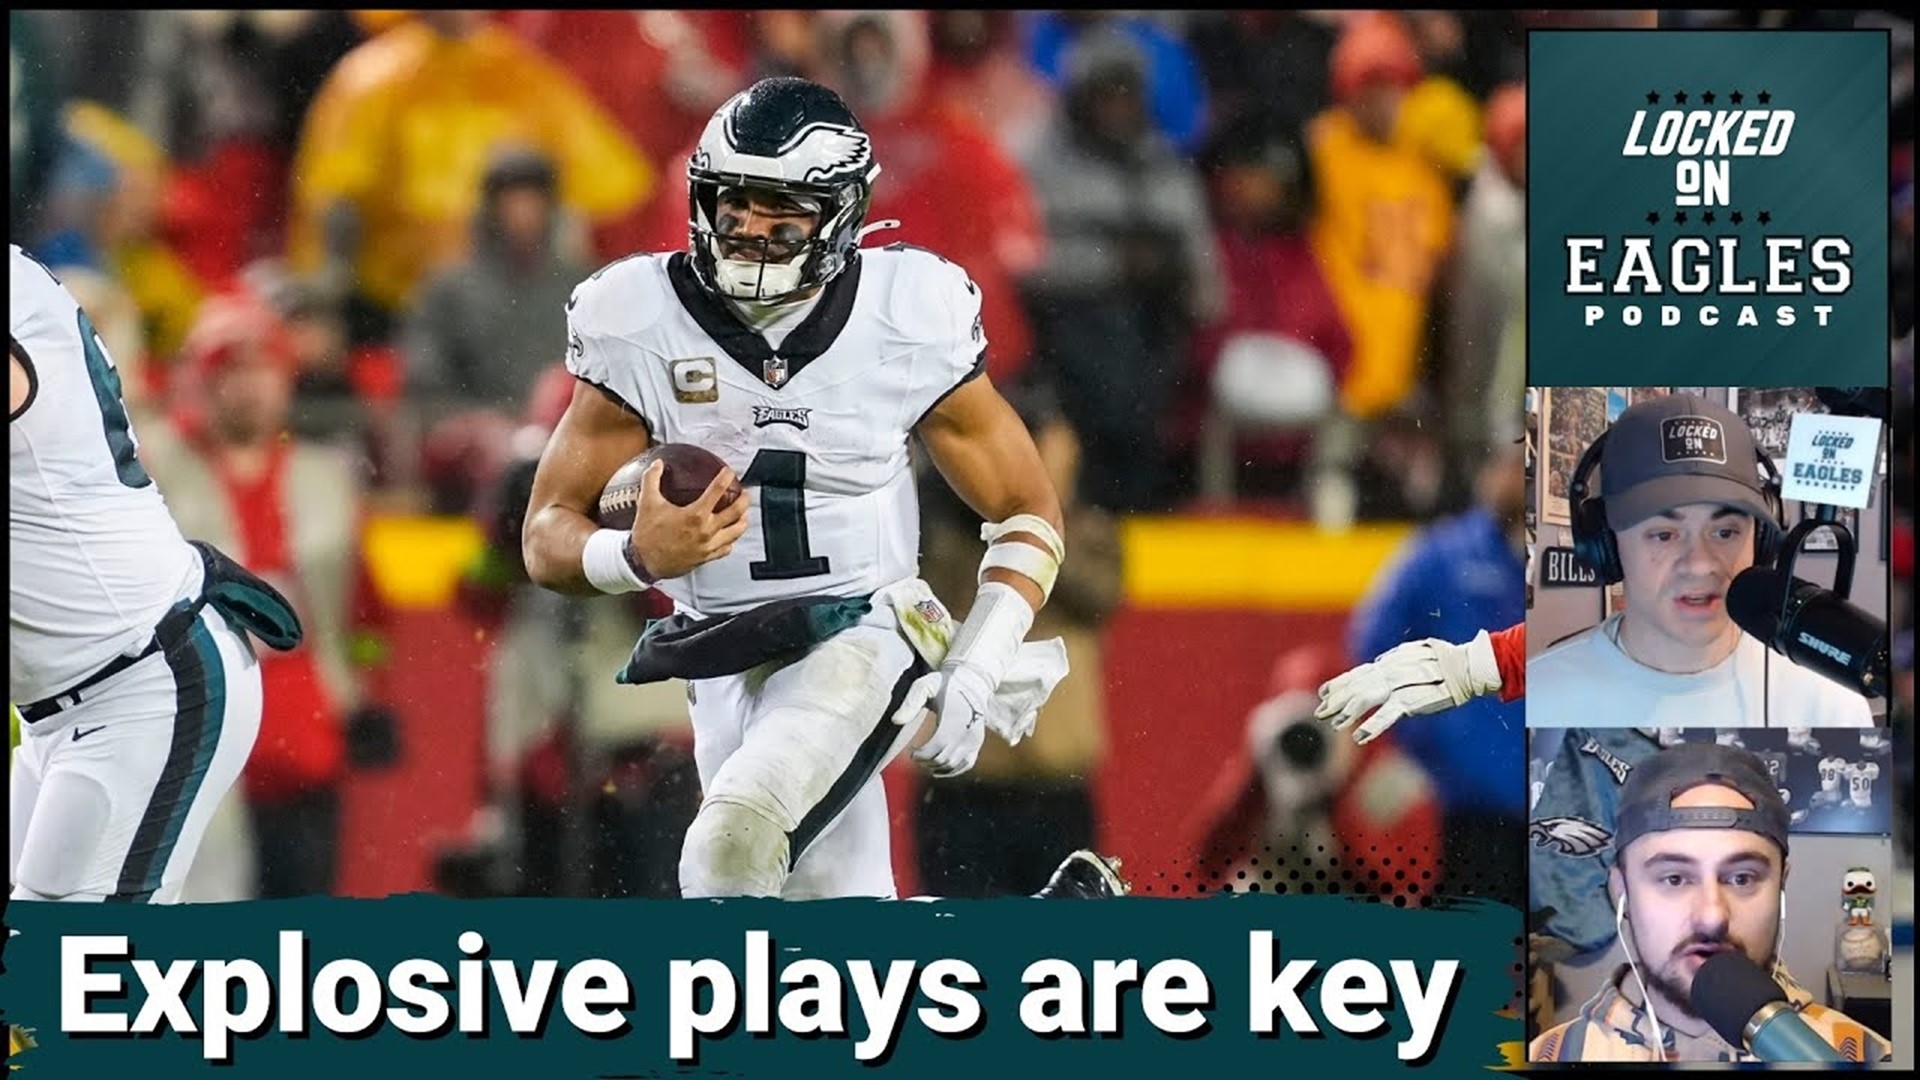 The Philadelphia Eagles offense is preparing for another game where their explosive plays are going to come up big against a fiery Buffalo Bills offense.